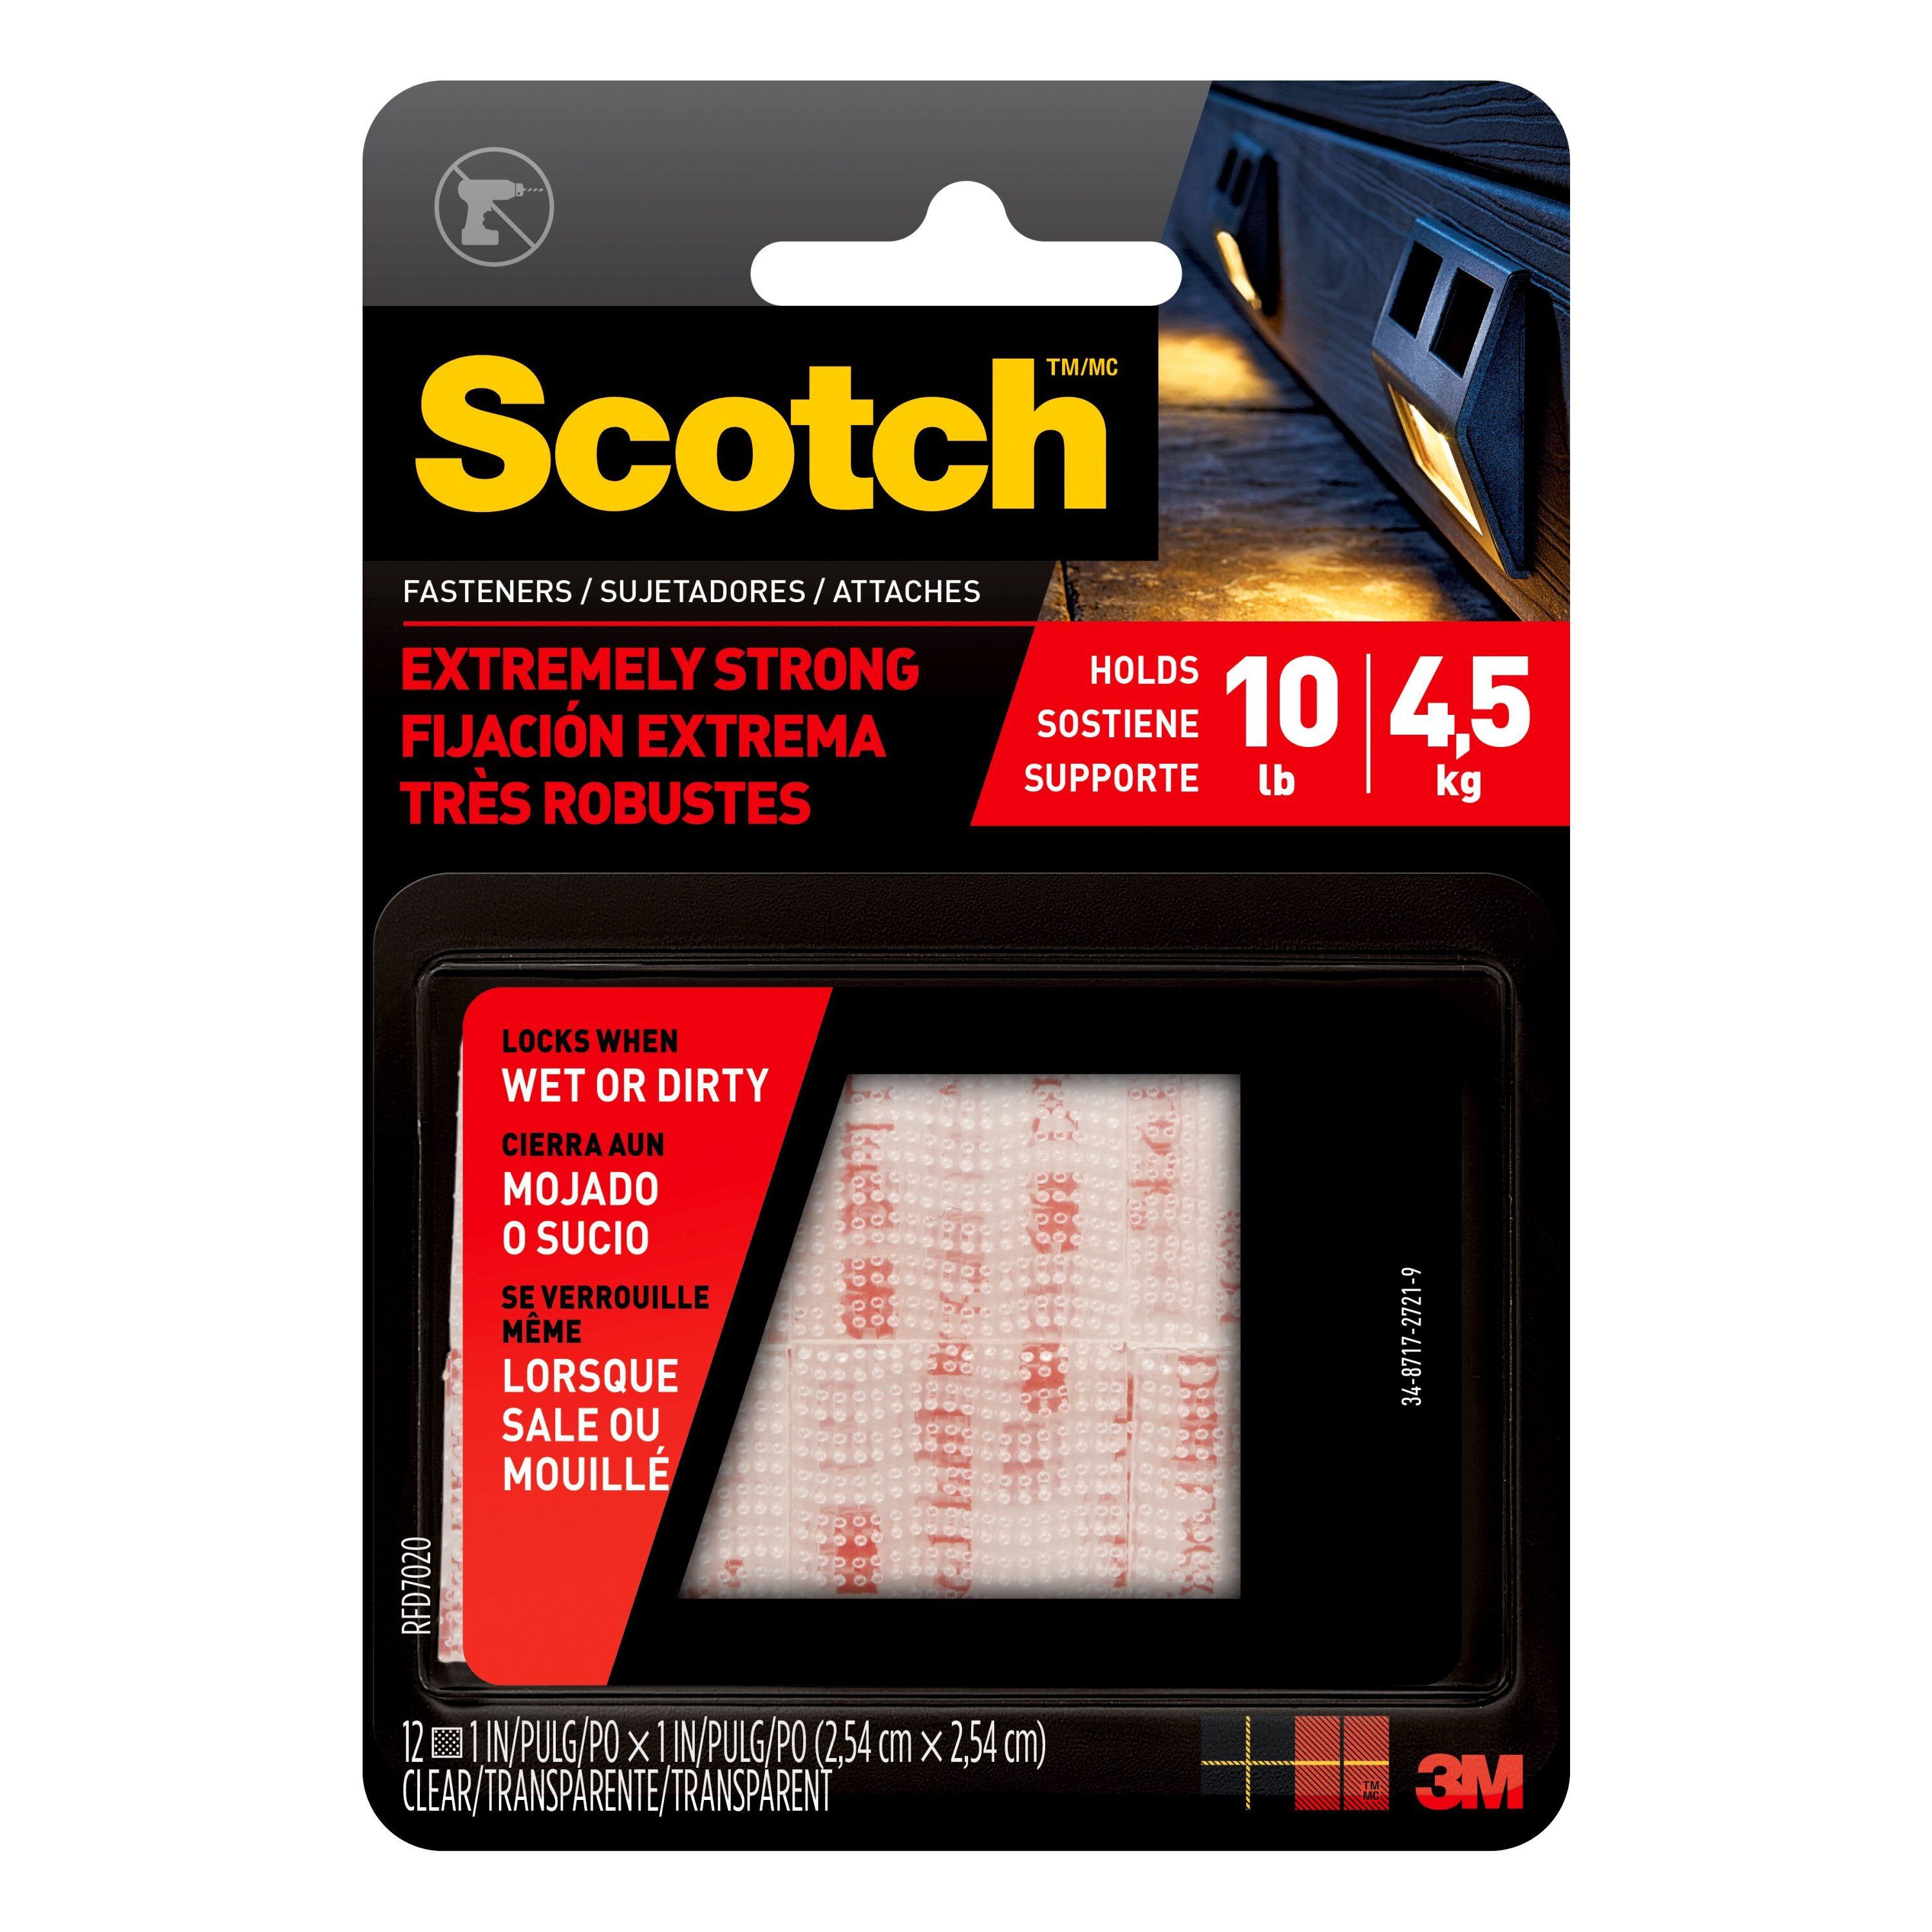 3M 64284 Scotch All-Weather Fasteners, 1 Inch x 3 Inches, Strips, Clear (4  Pack) 